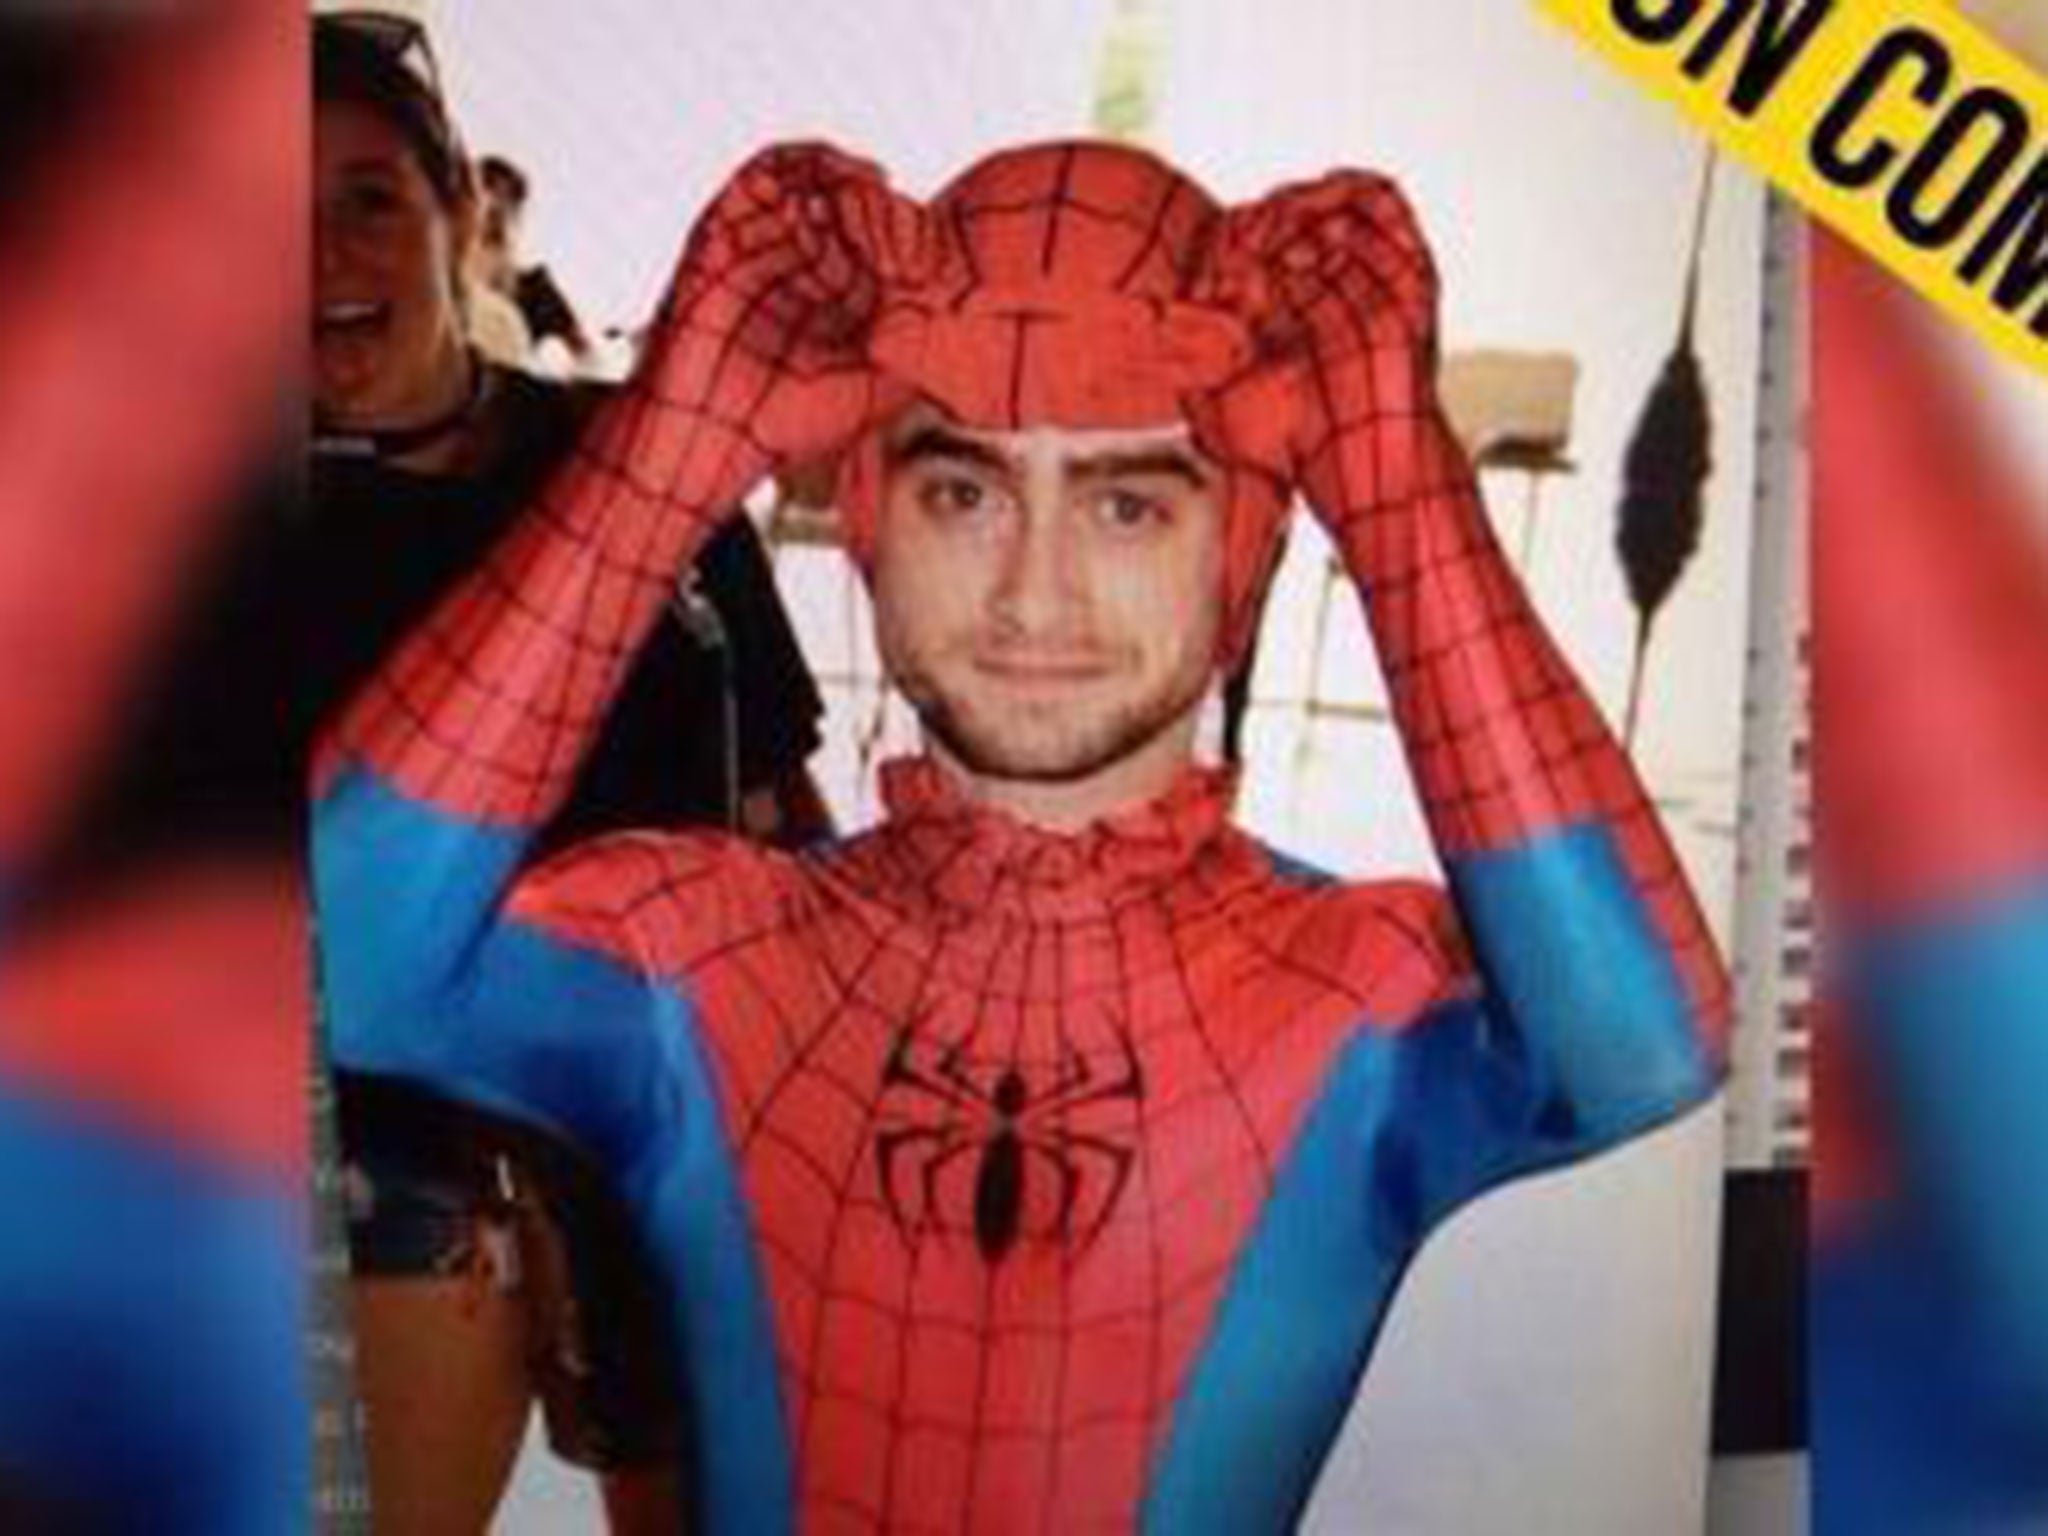 Daniel Radcliffe goes undercover as Spider-Man at San Diego Comic Con